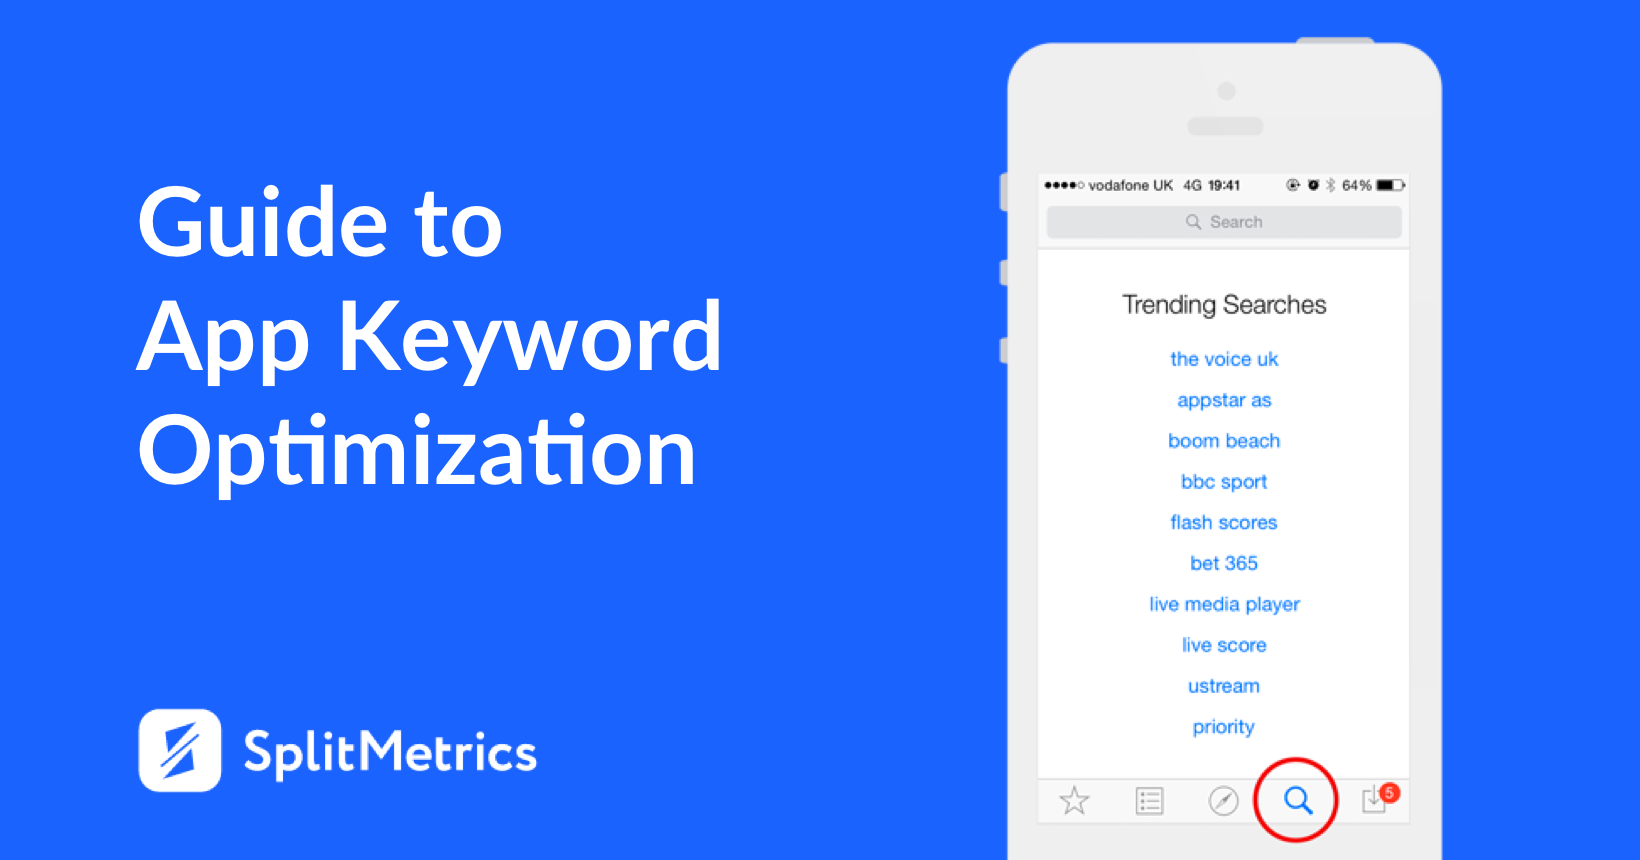 App Keyword Optimization: Here is How to Double Organic App Installs